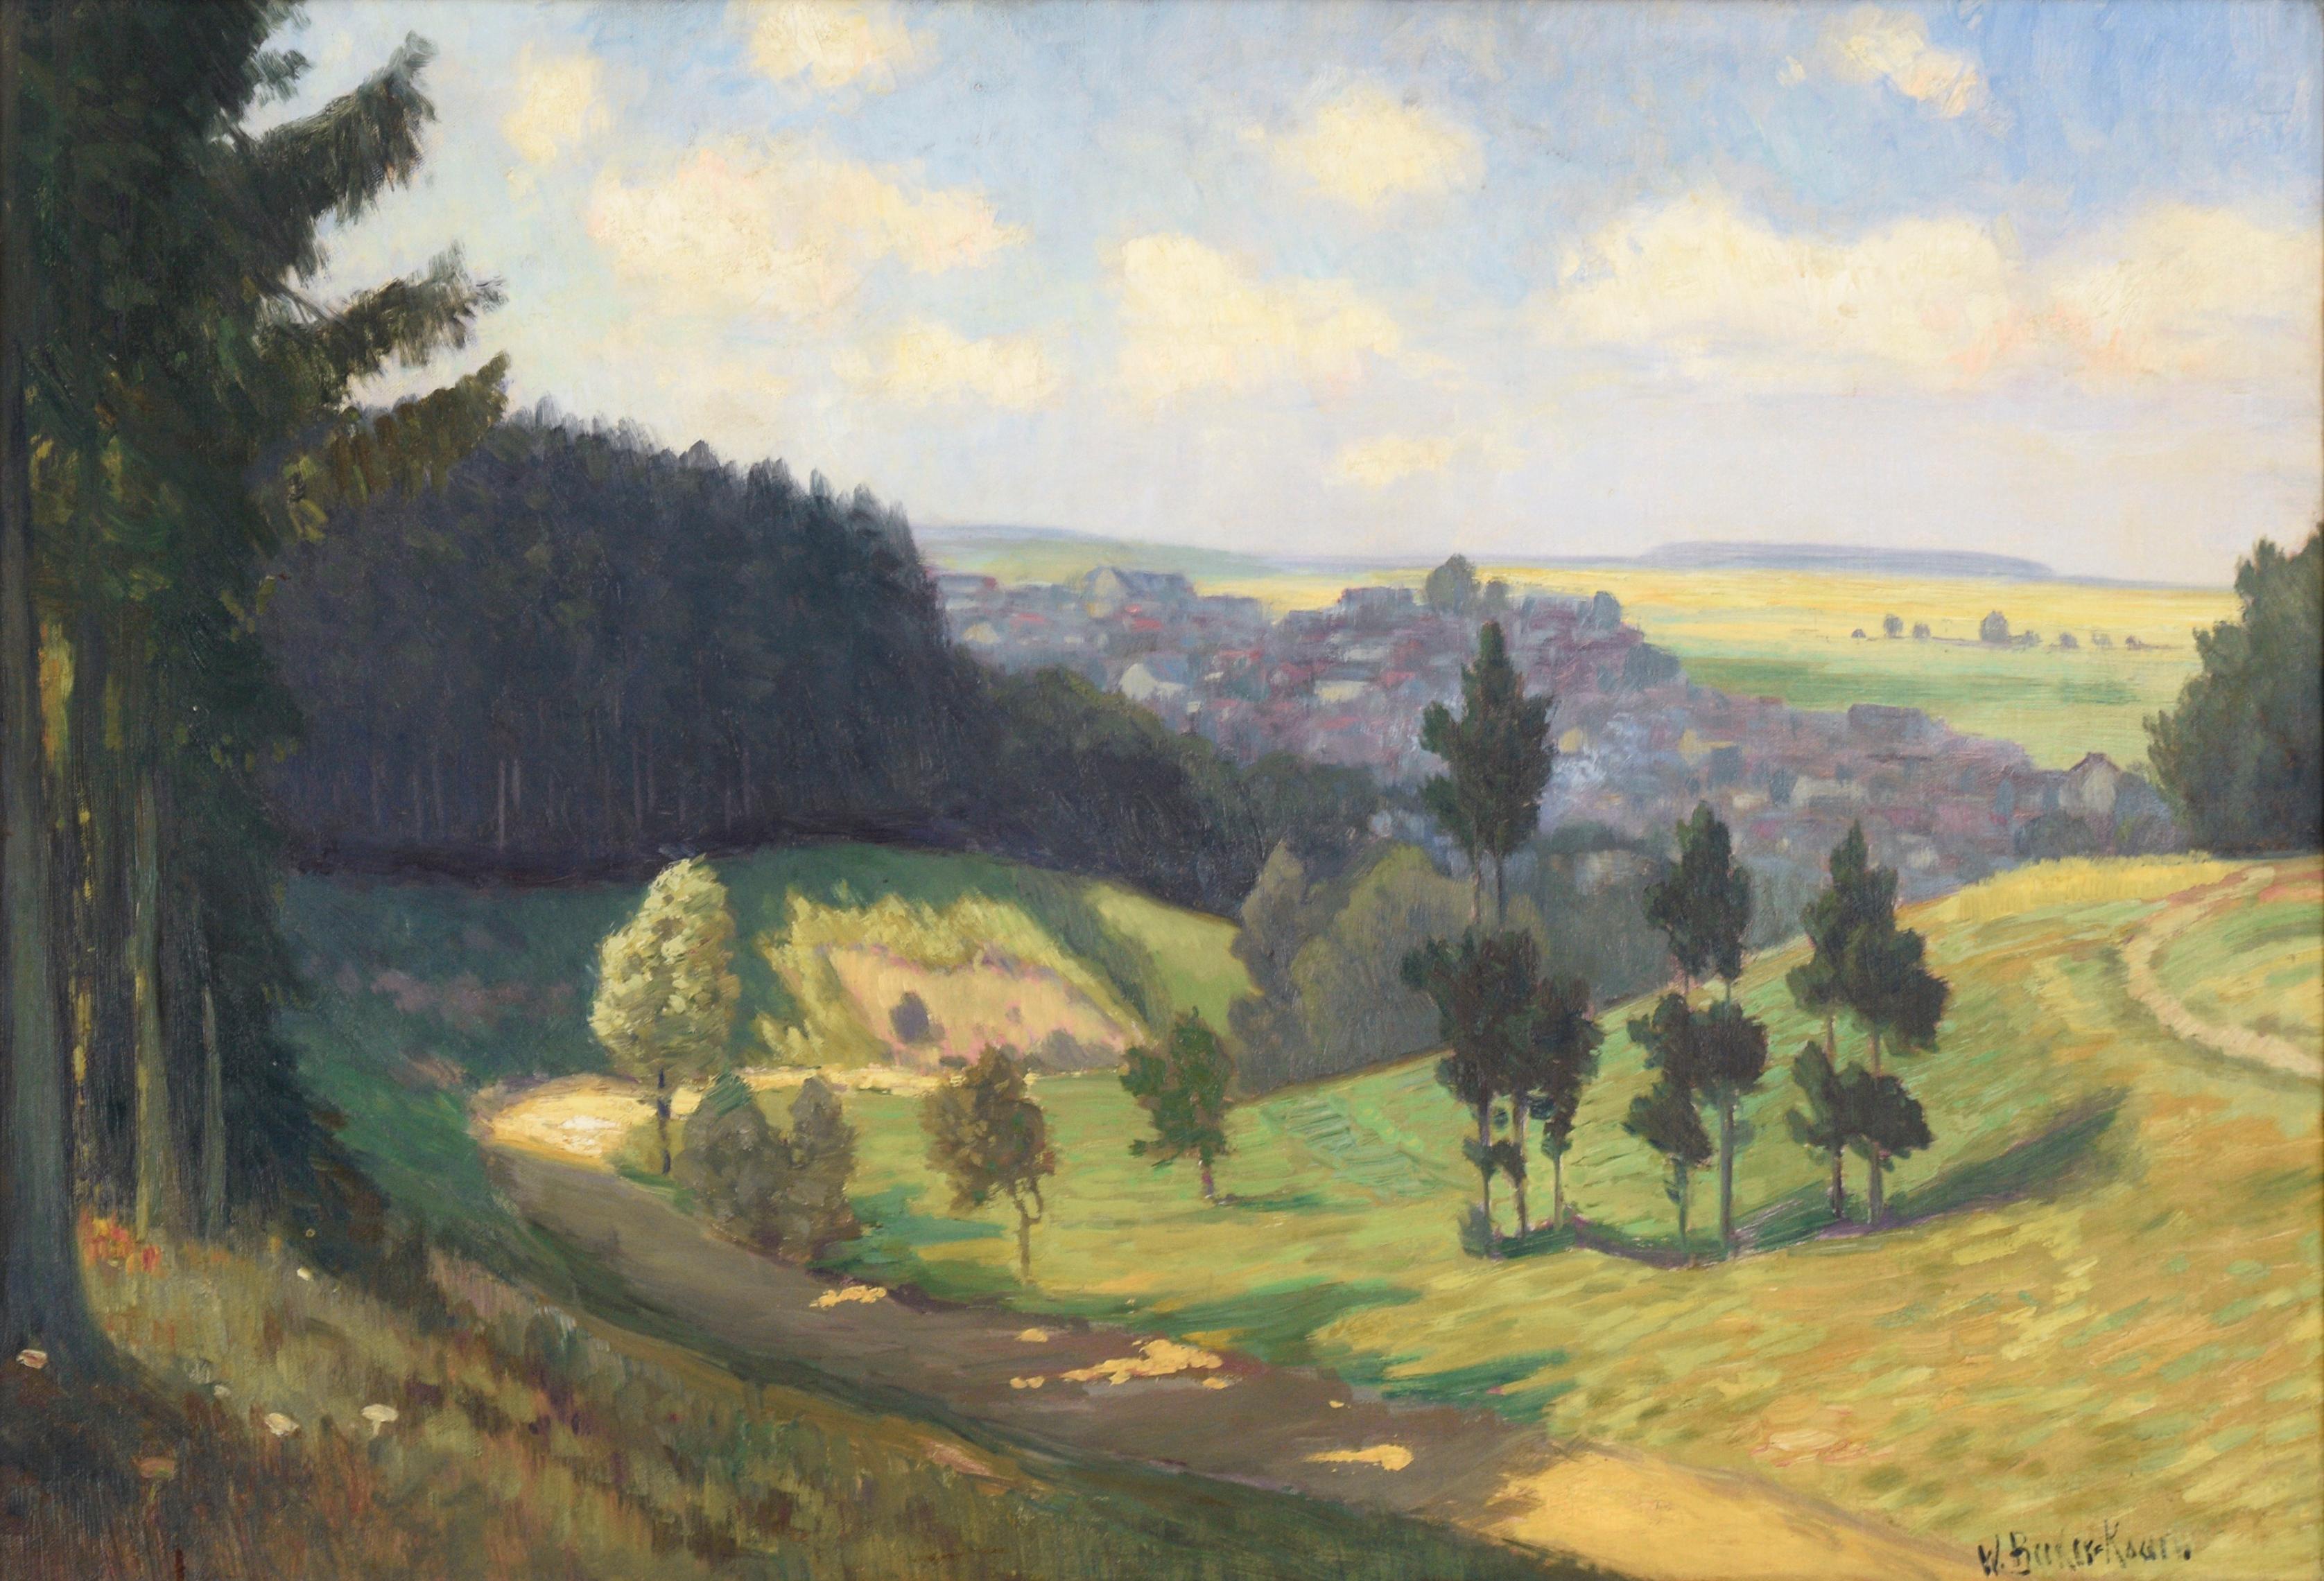 Village in the Valley, Turn-of-the-Century German Impressionist Landscape - Painting by Willy Becker-Kassel